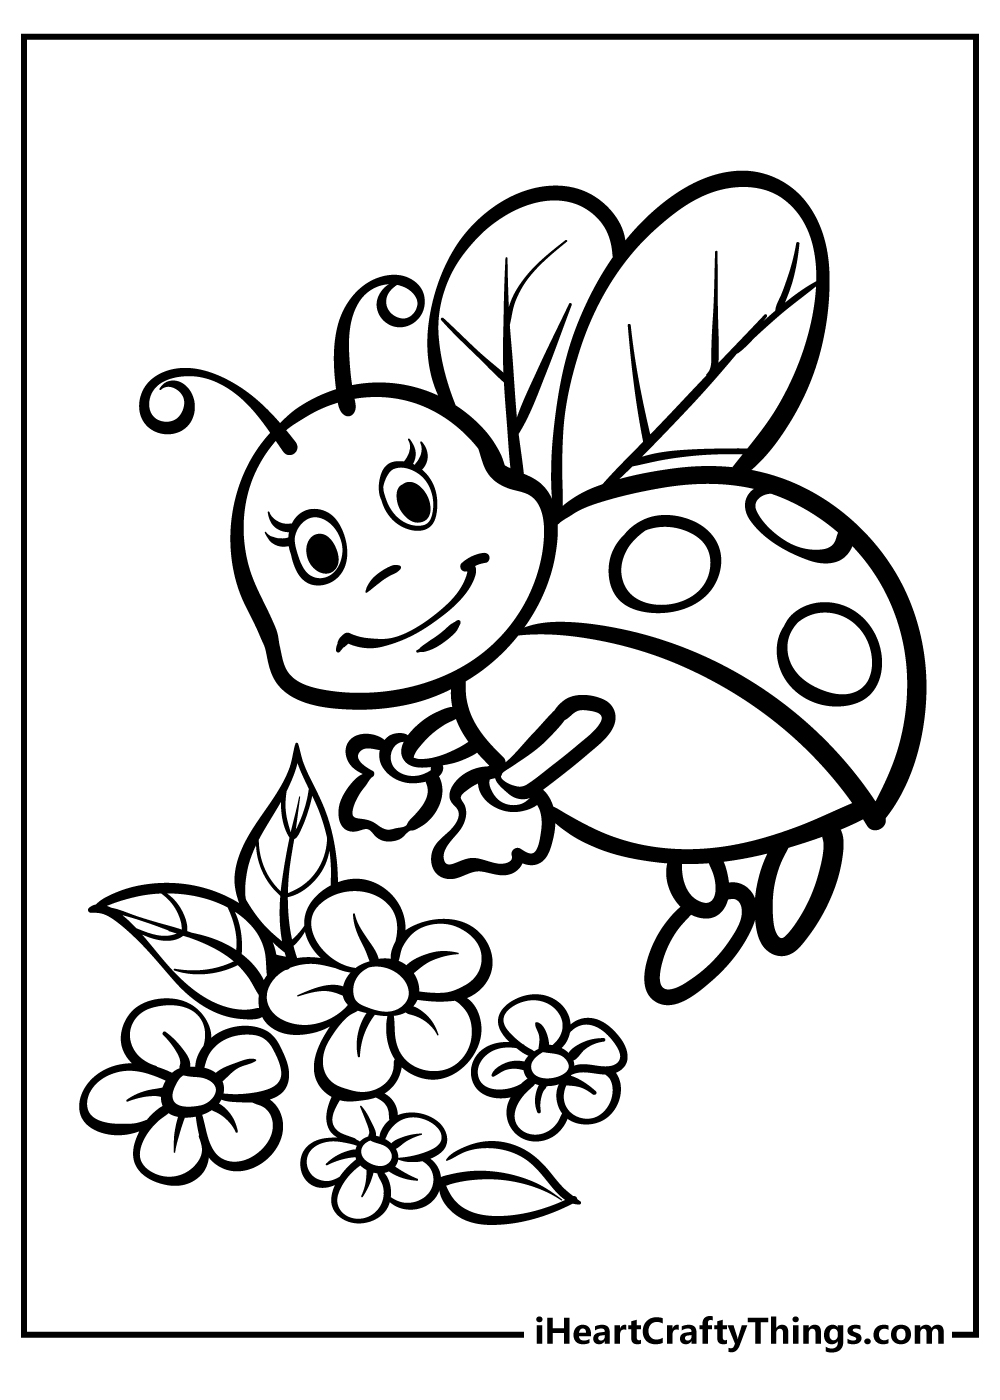 Ladybug Easy Coloring Pages